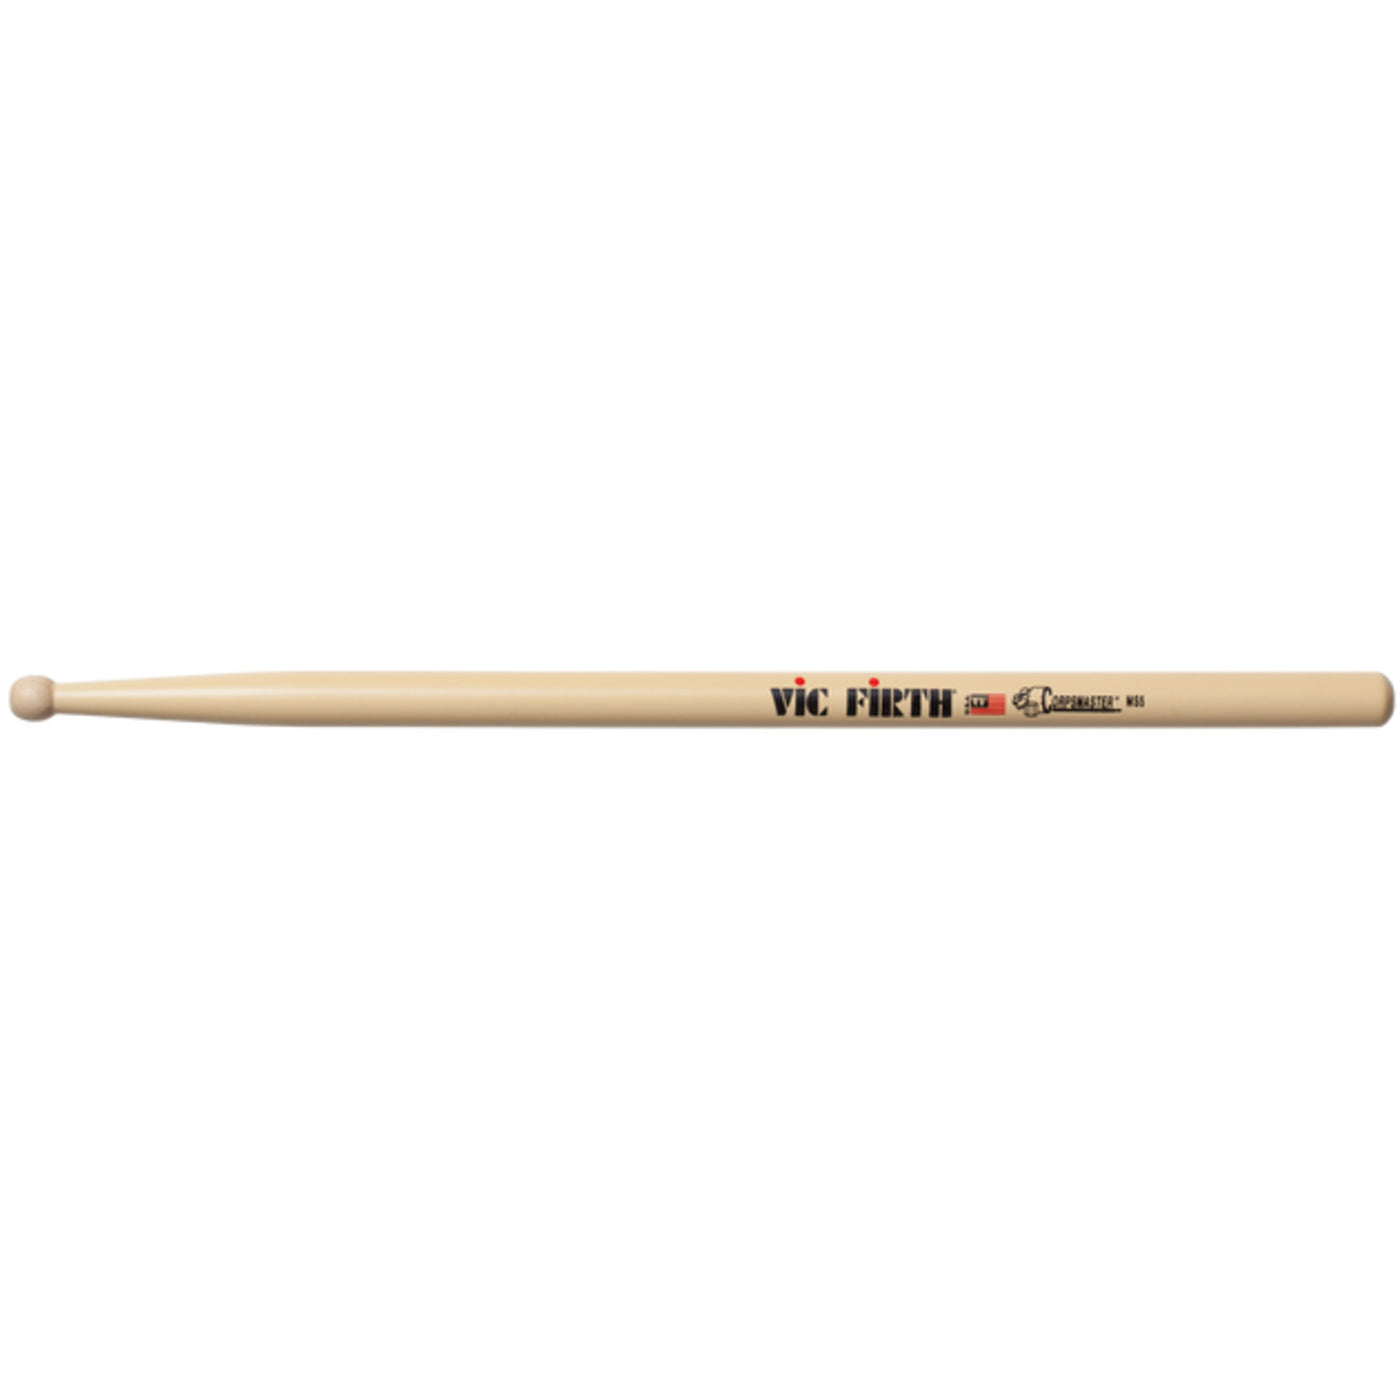 Vic Firth Corpsmaster Snare - 17" X .705" Drumstick (MS5)